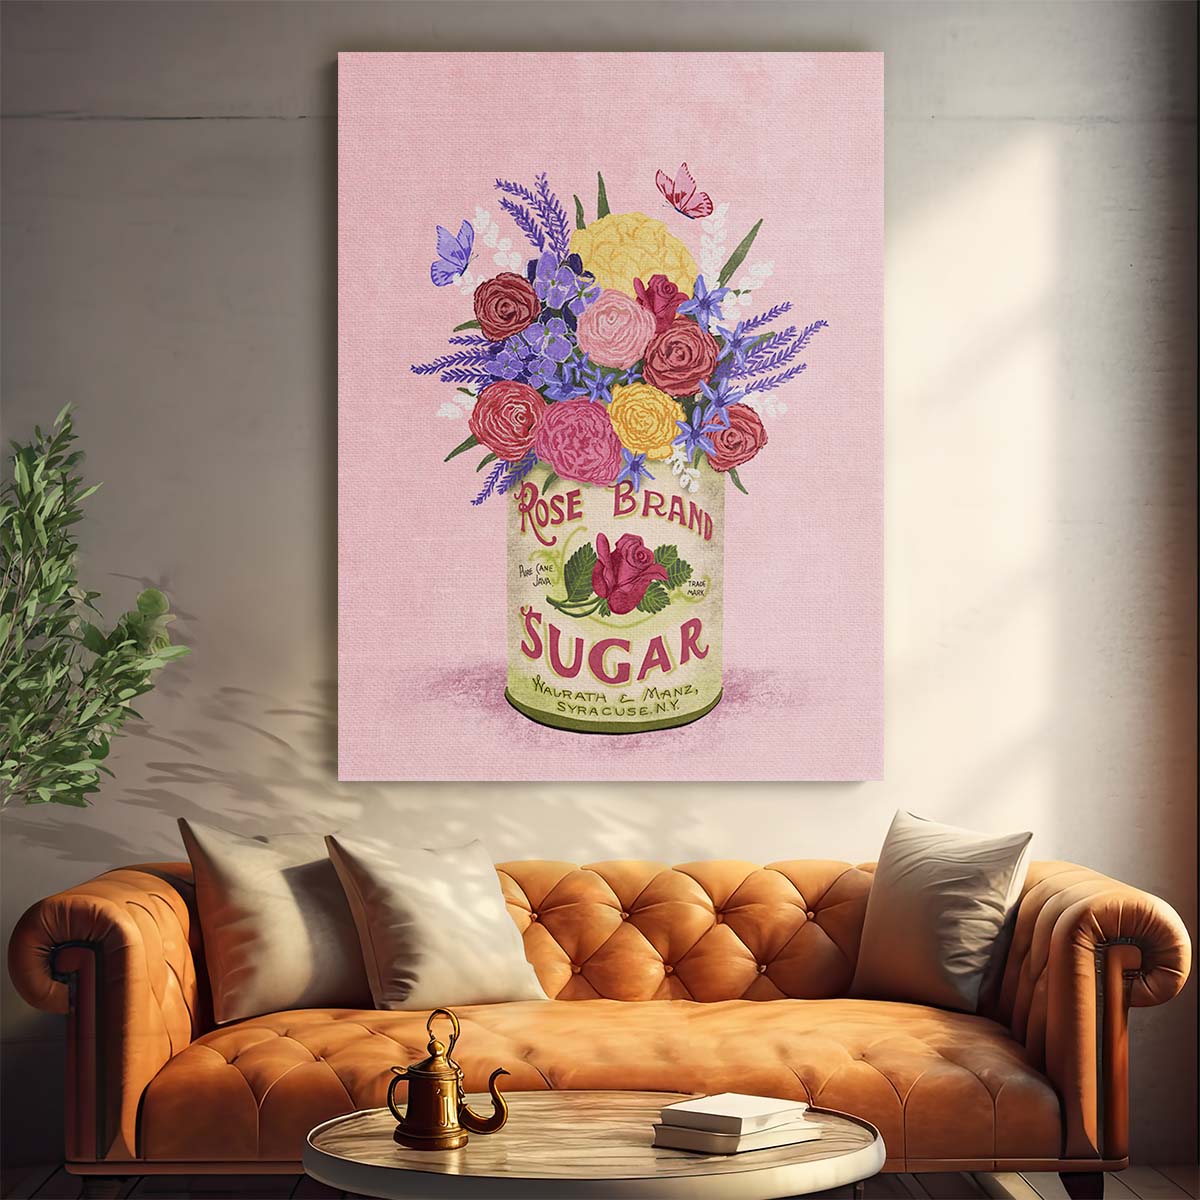 Vintage Botanical Illustration Roses & Butterflies in Retro Can Art by Luxuriance Designs, made in USA